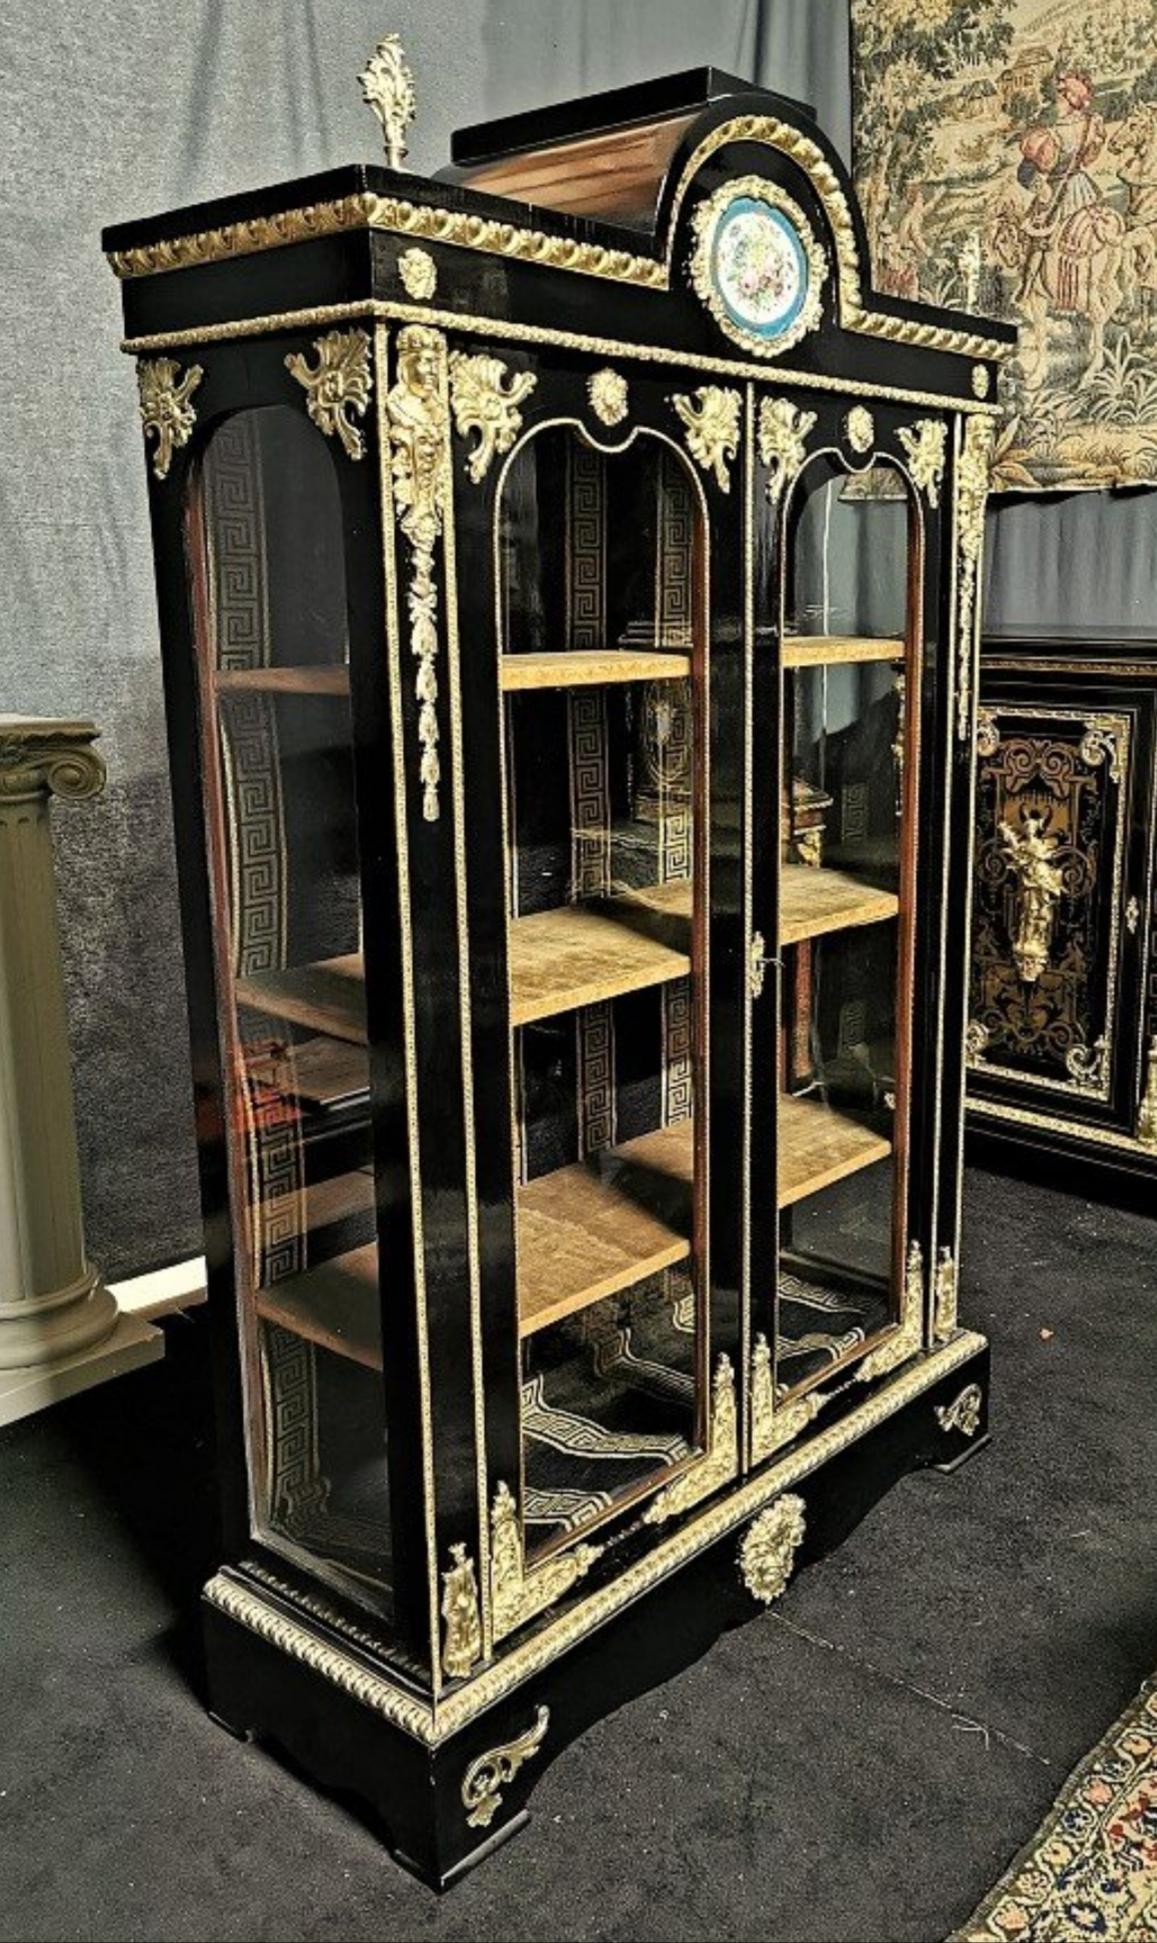 Stunning Napoleon III Boulle Vitrine bookcase 2 doors with a beautiful Sèvres Porcelain plate in a gorgeous and rare display case with 4 glass facades, with rich ornamentation of gilt bronzes, including a pair of high falls and the God Neptune's